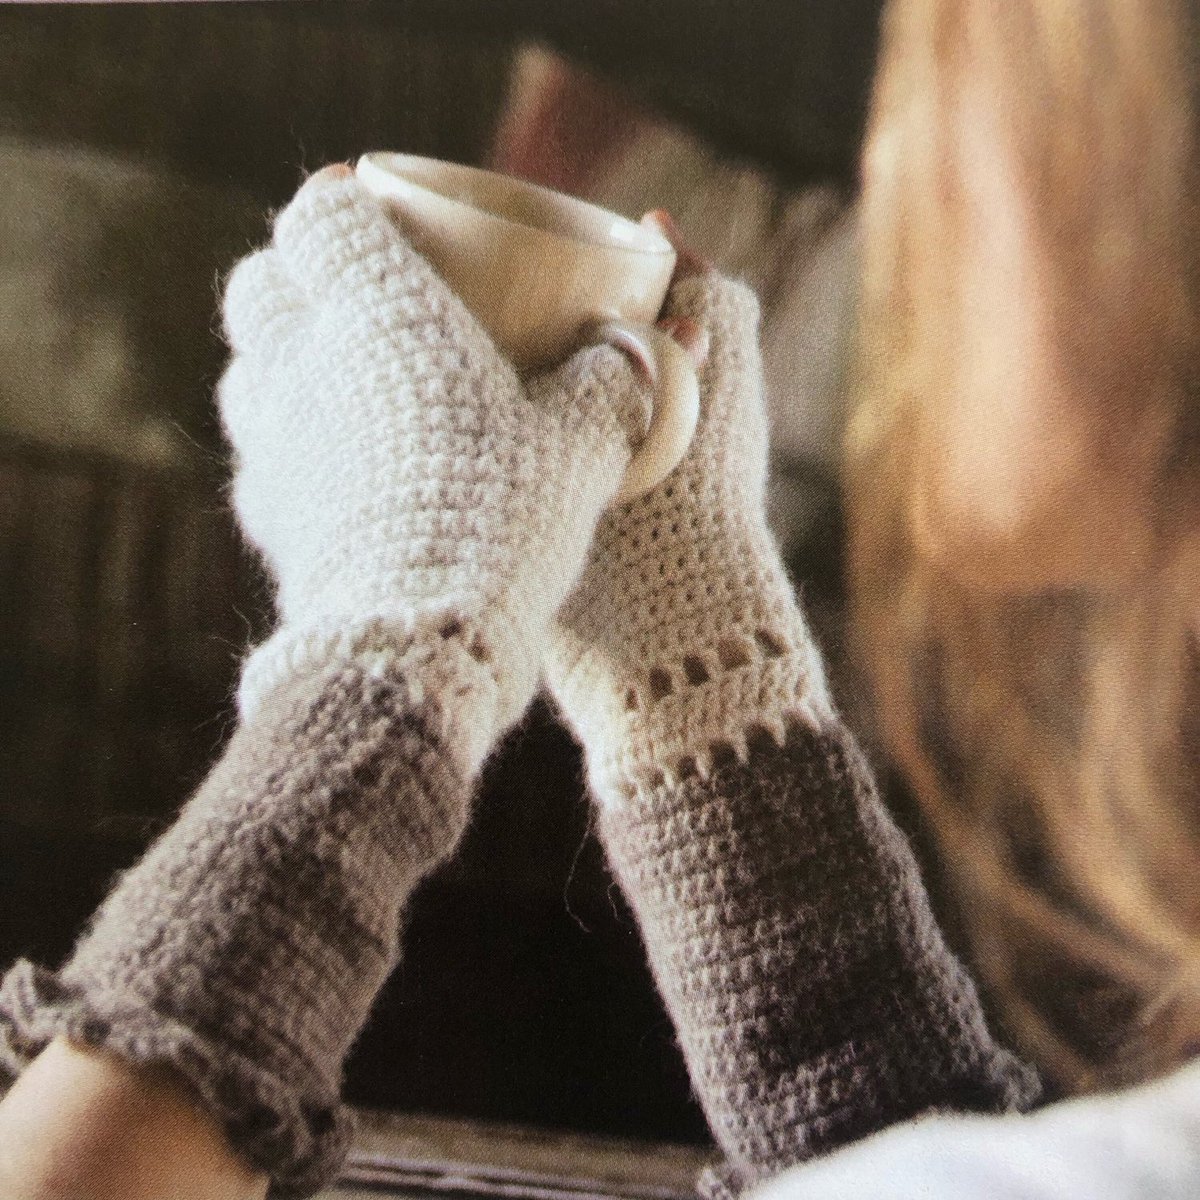 Excited to share this item from my #etsy shop: Crochet Fingerless Mitts Crochet Pattern  #crochetpattern #crochet #crochetmitts #fingerlessmitts #fingerlessgloves #coldoutside #warmup #mhhsbd #crochetgloves #crochetfrill #crochetwarmers #crochetgifts etsy.me/3XGG1rv